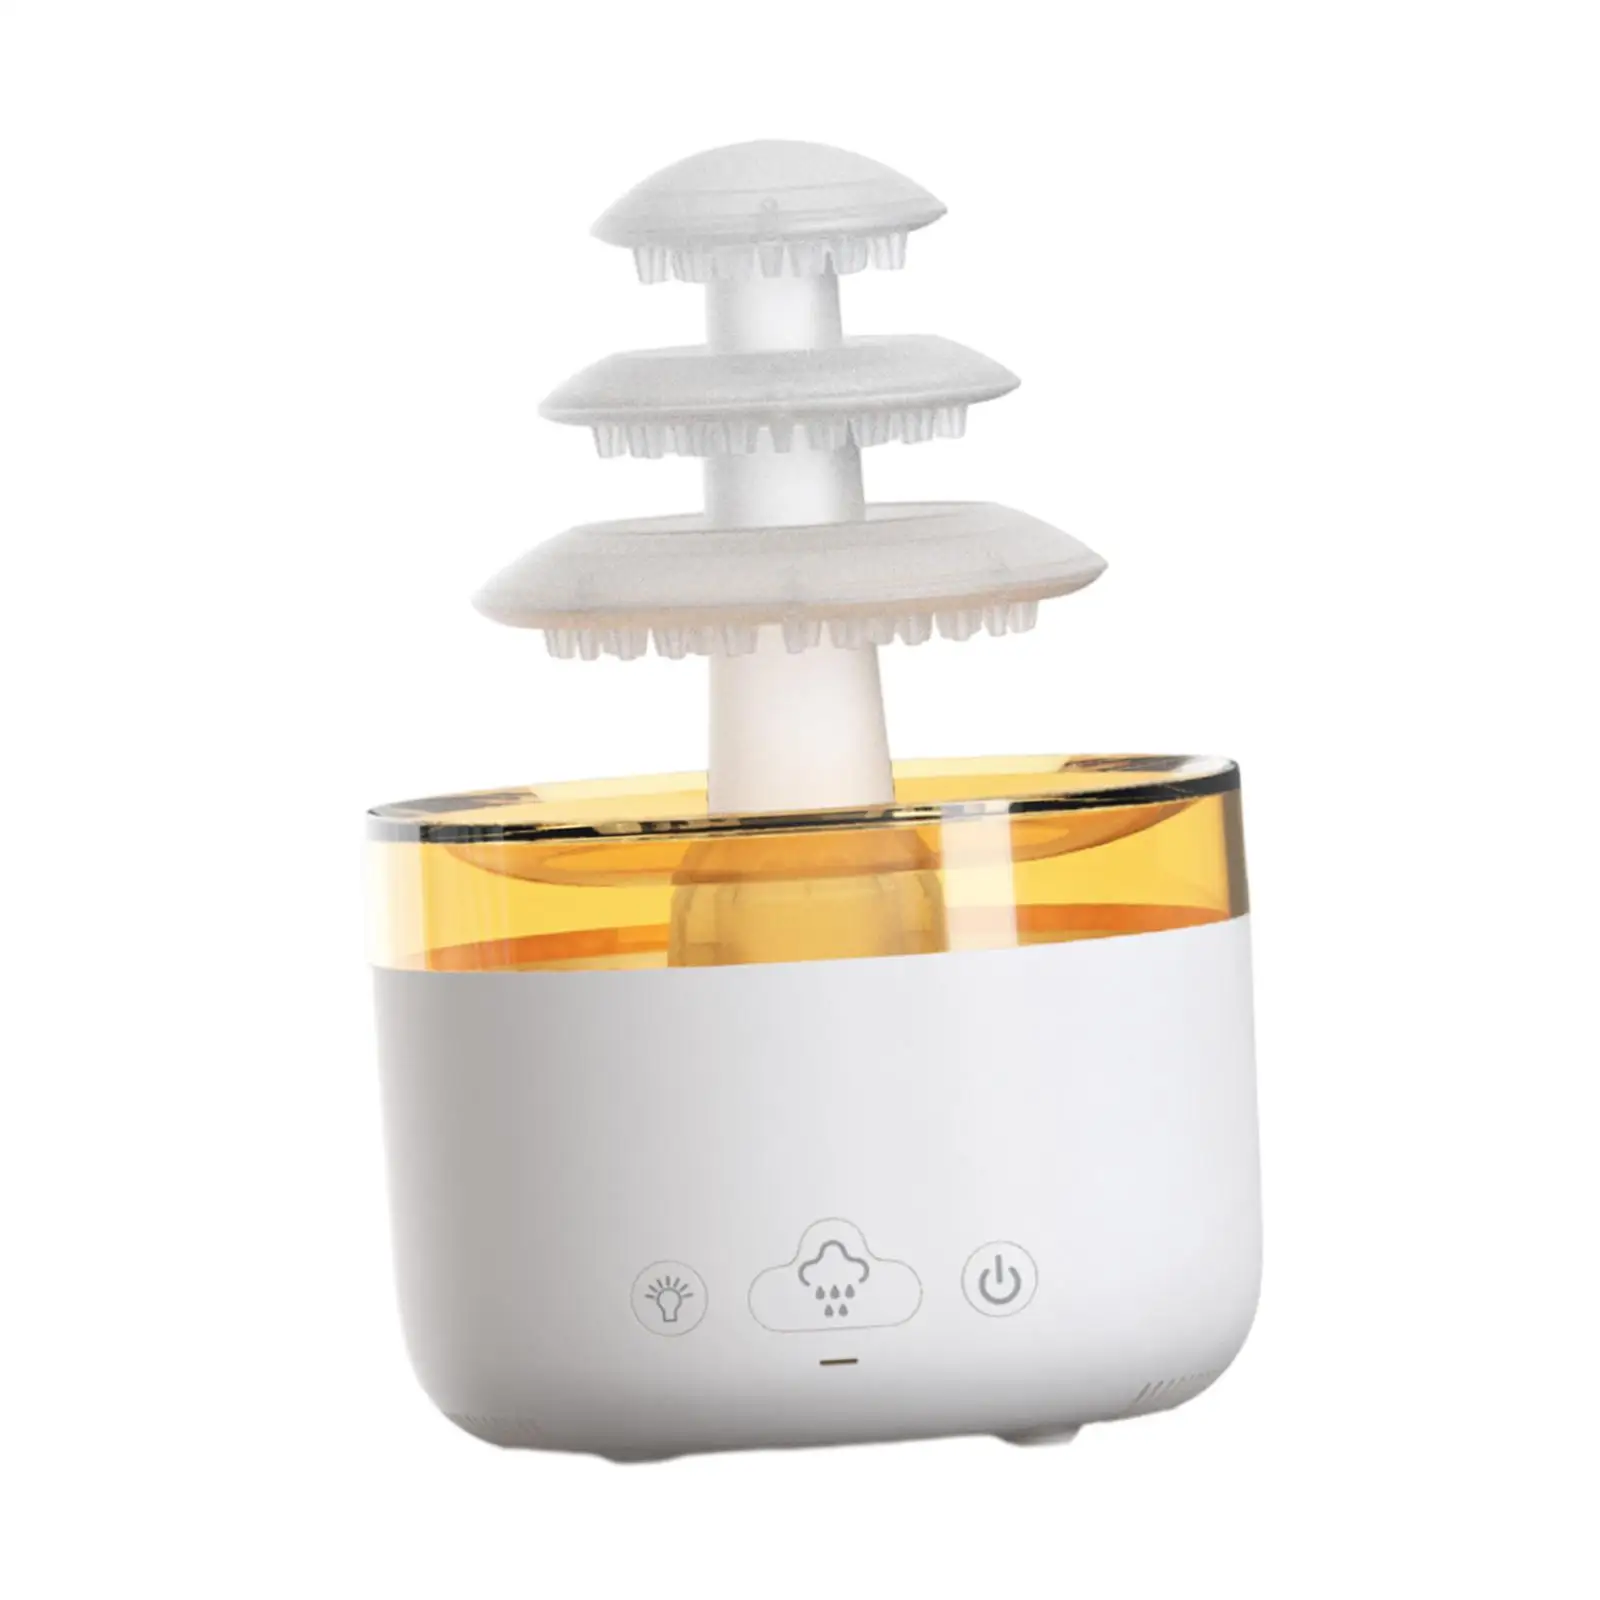 Diffusers for Essential Oils 500ml Premium 7 Colors Lights Changing Air Humidifier for Bedroom Study Office Bathroom Home Decor